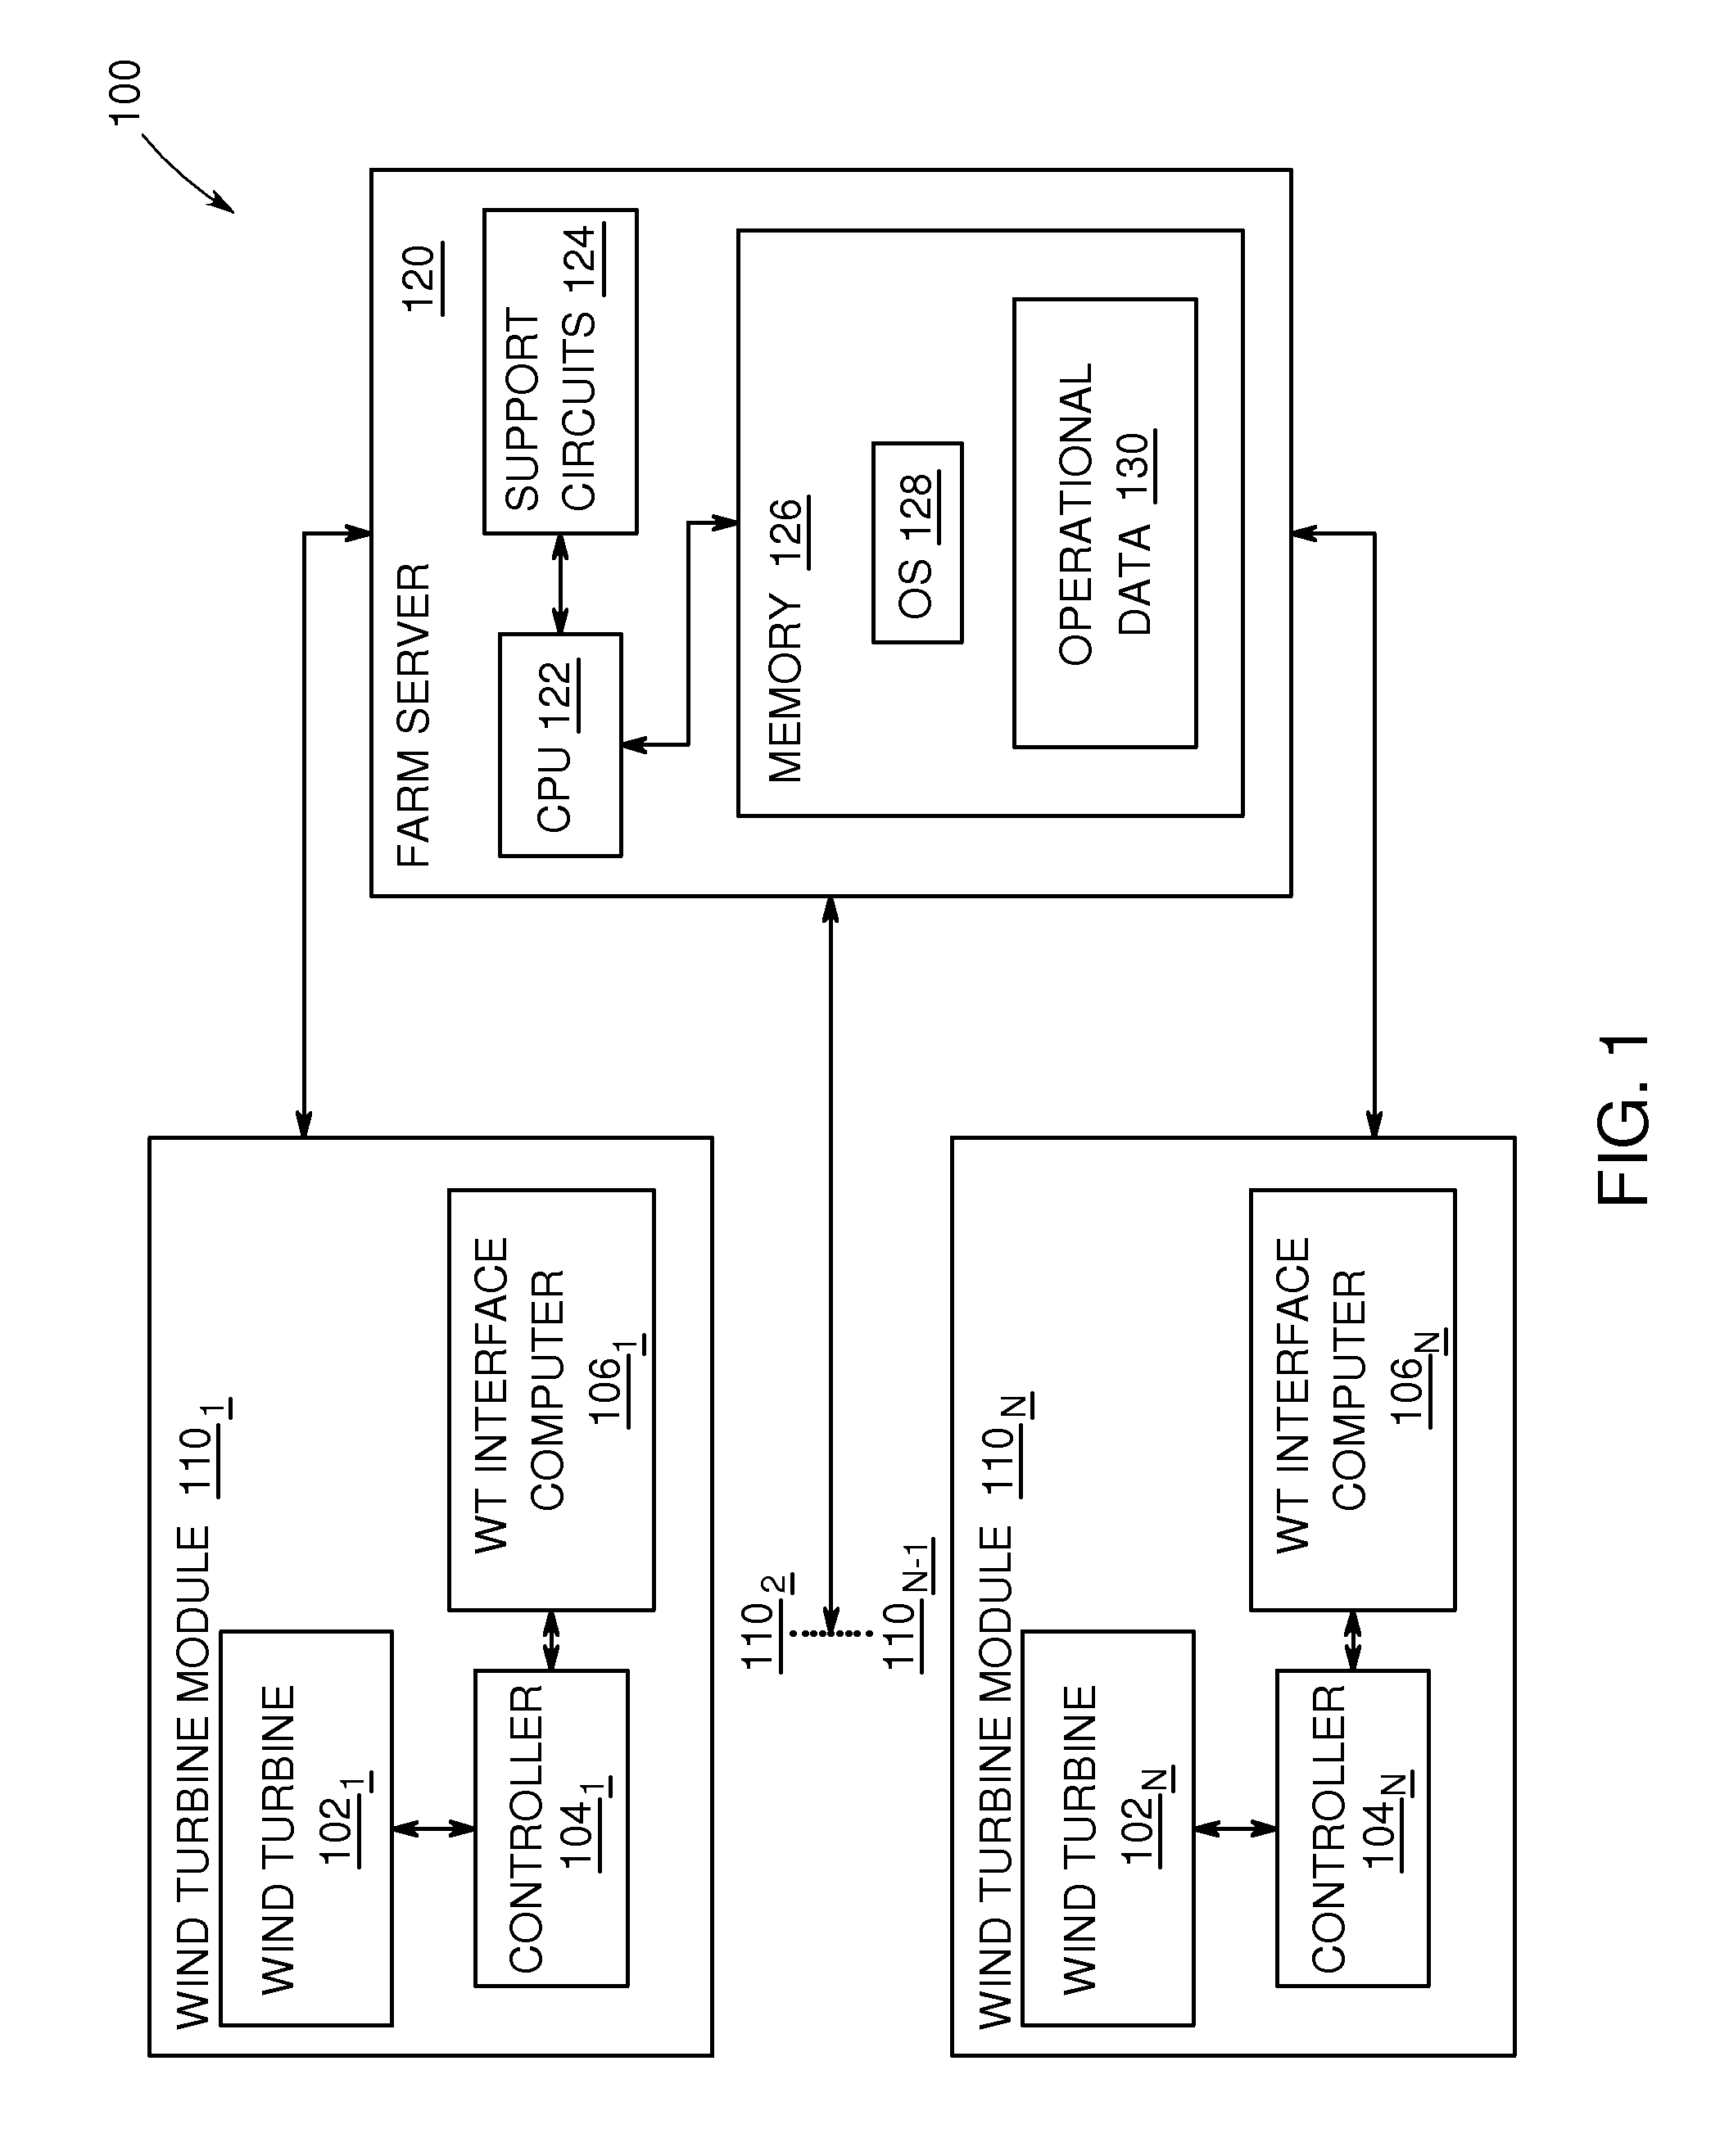 System and method for managing wind turbines and enhanced diagnostics